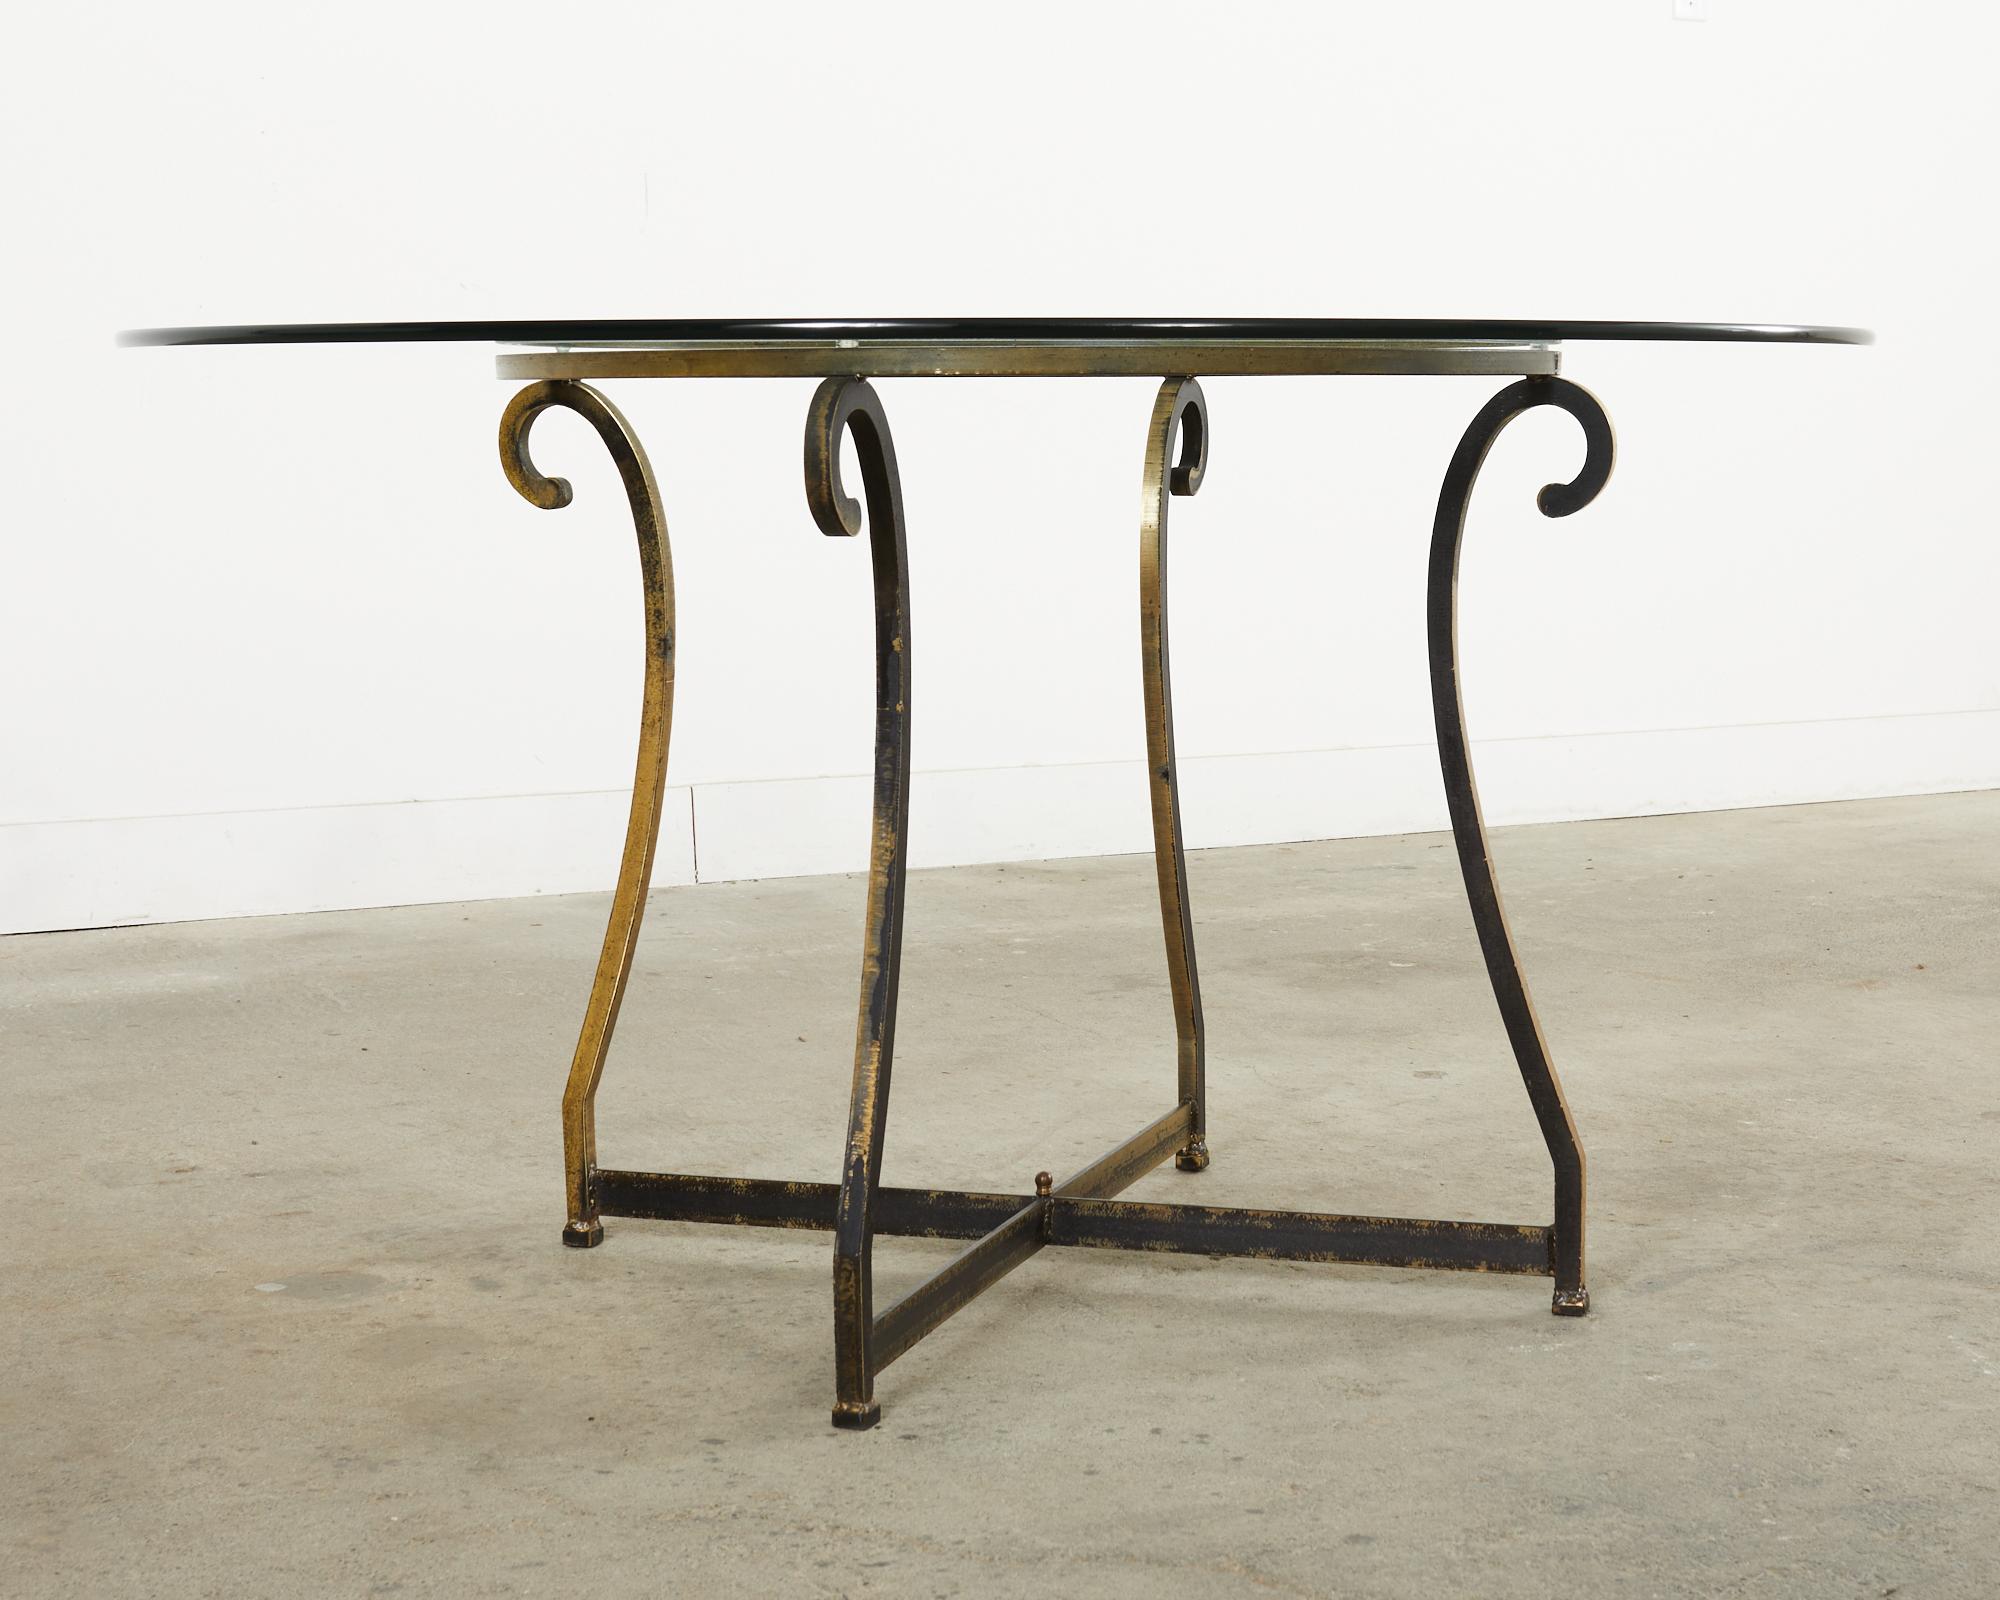 20th Century French Bronzed Iron and Glass Scrolled Garden Dining Table